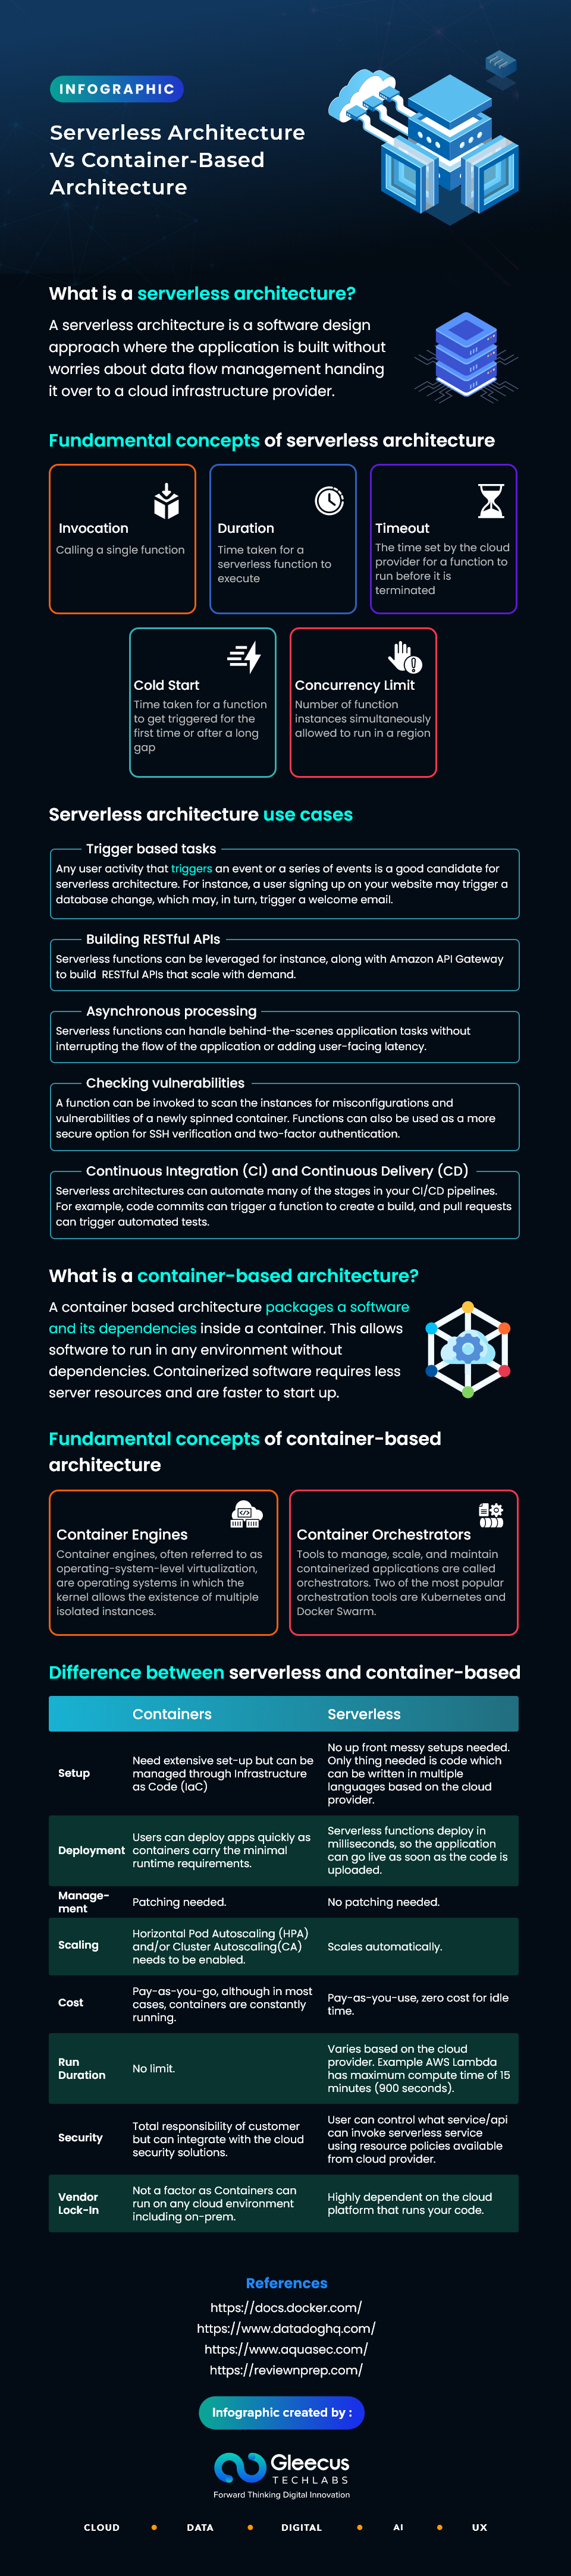 serverless vs container based architecture